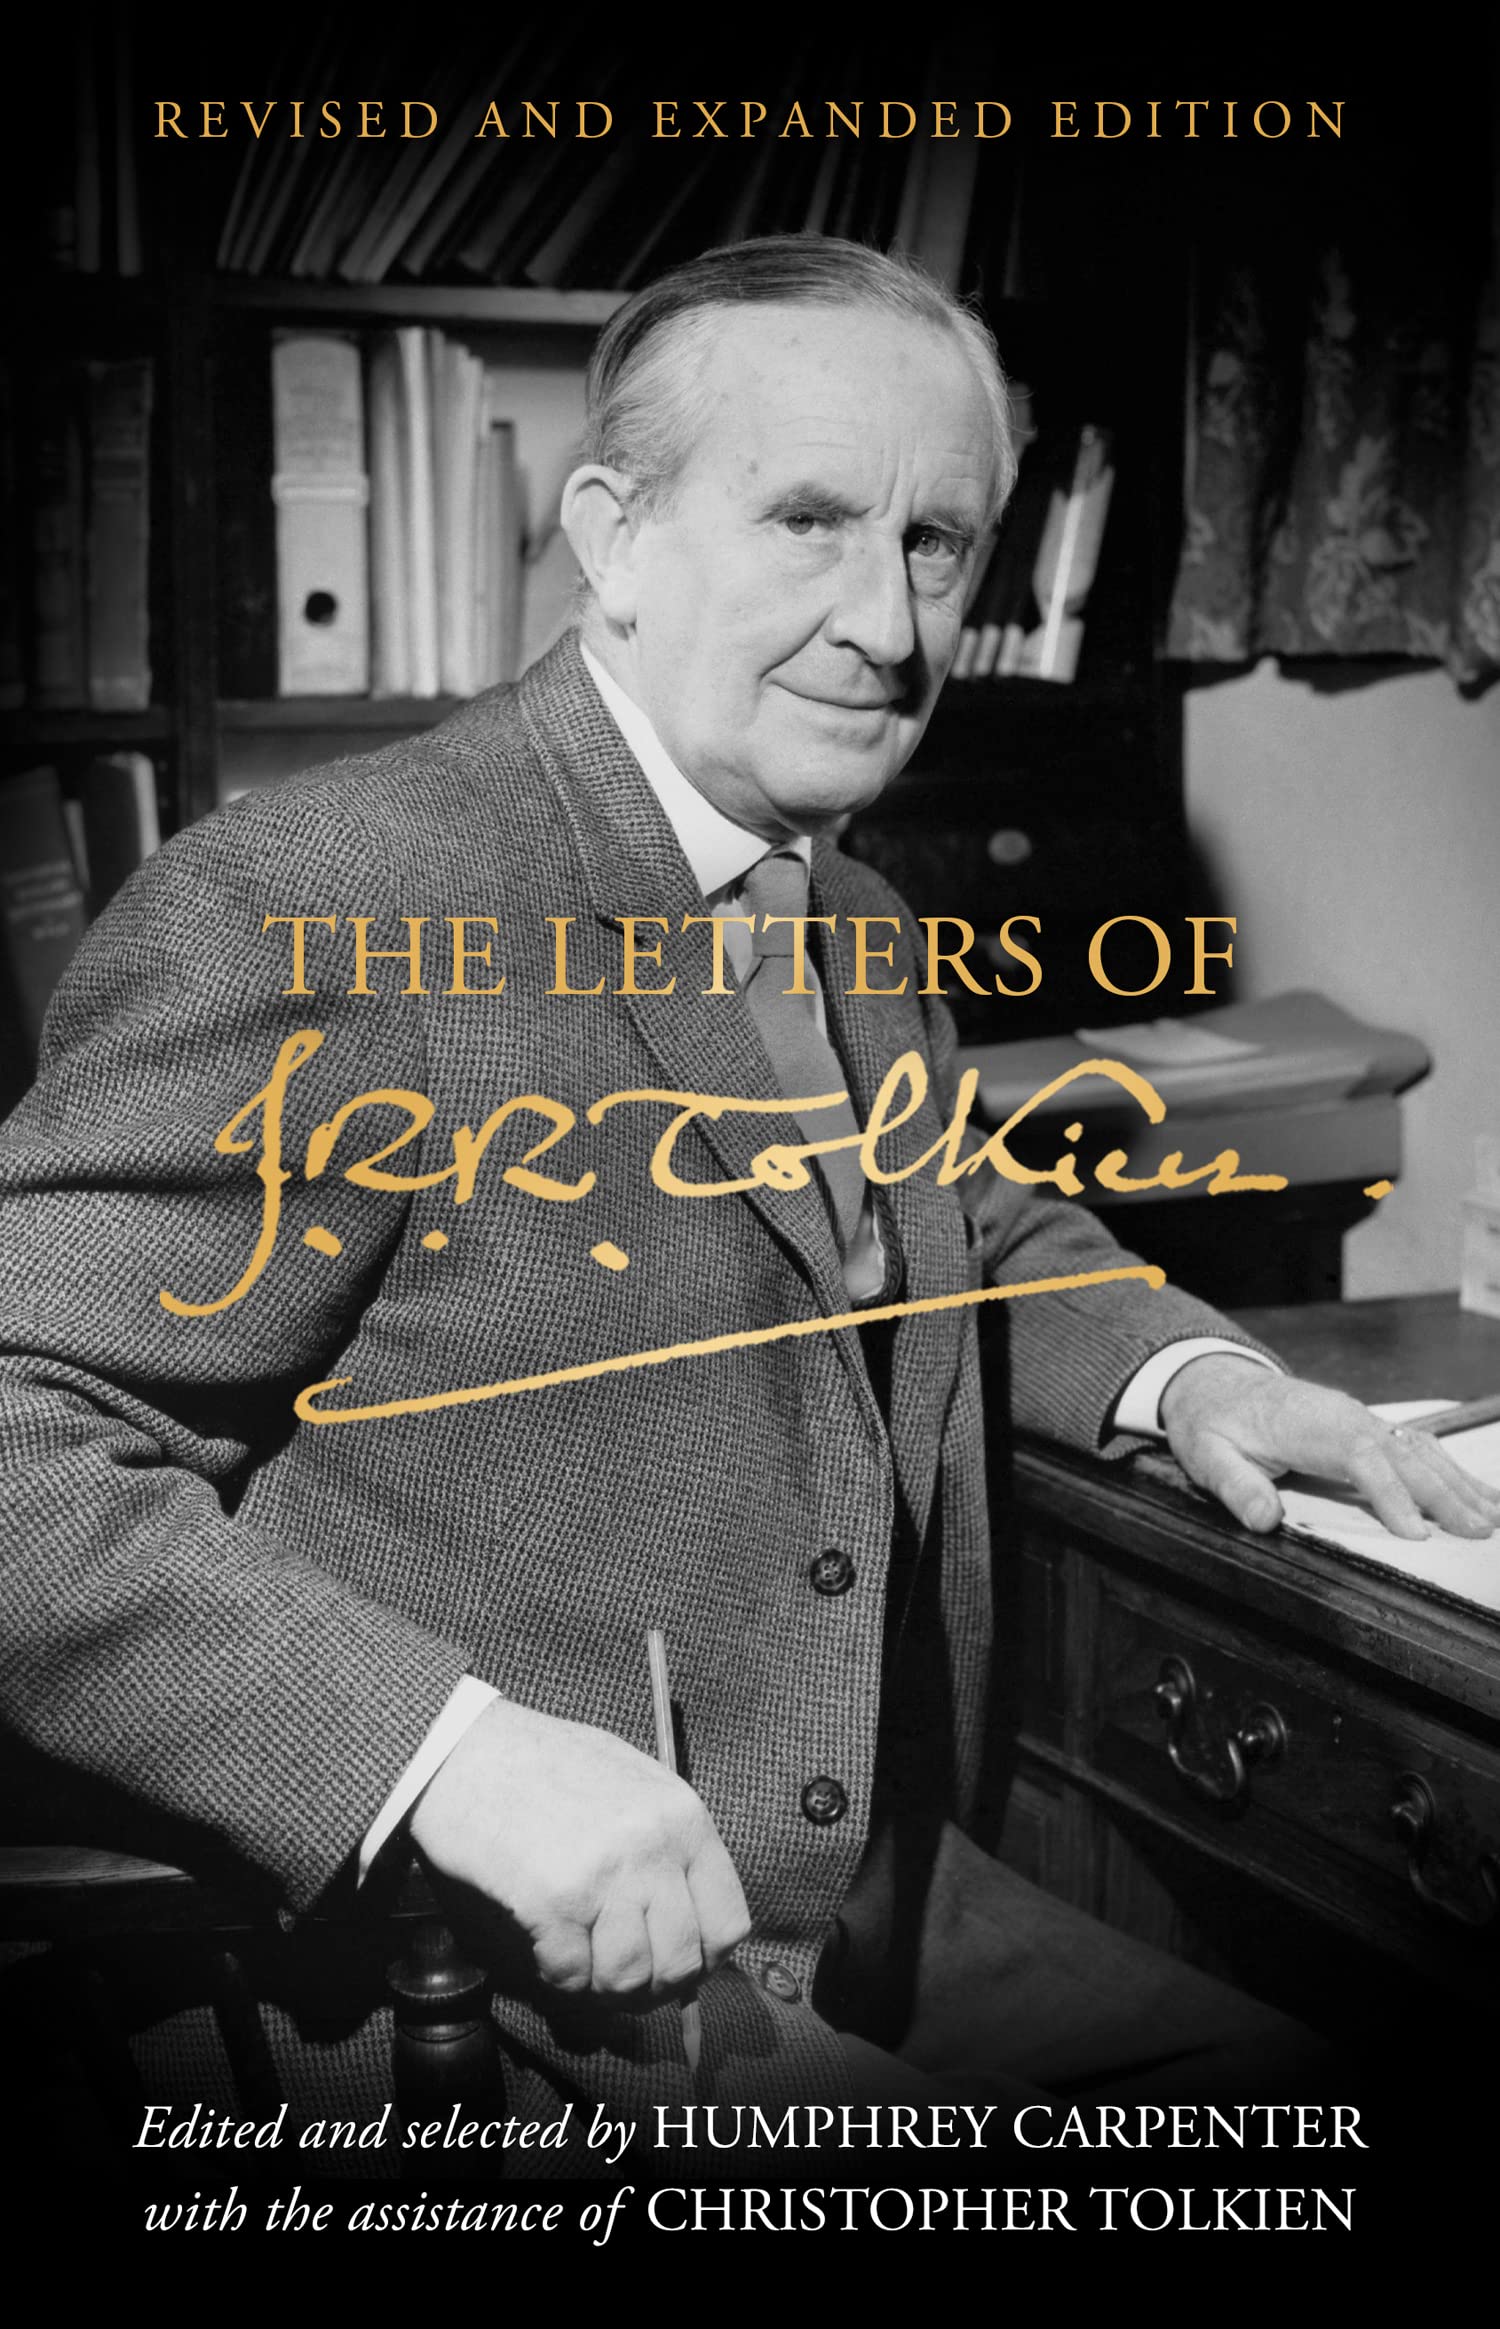 Expanded edition of The Letters of J.R.R. Tolkien coming this November